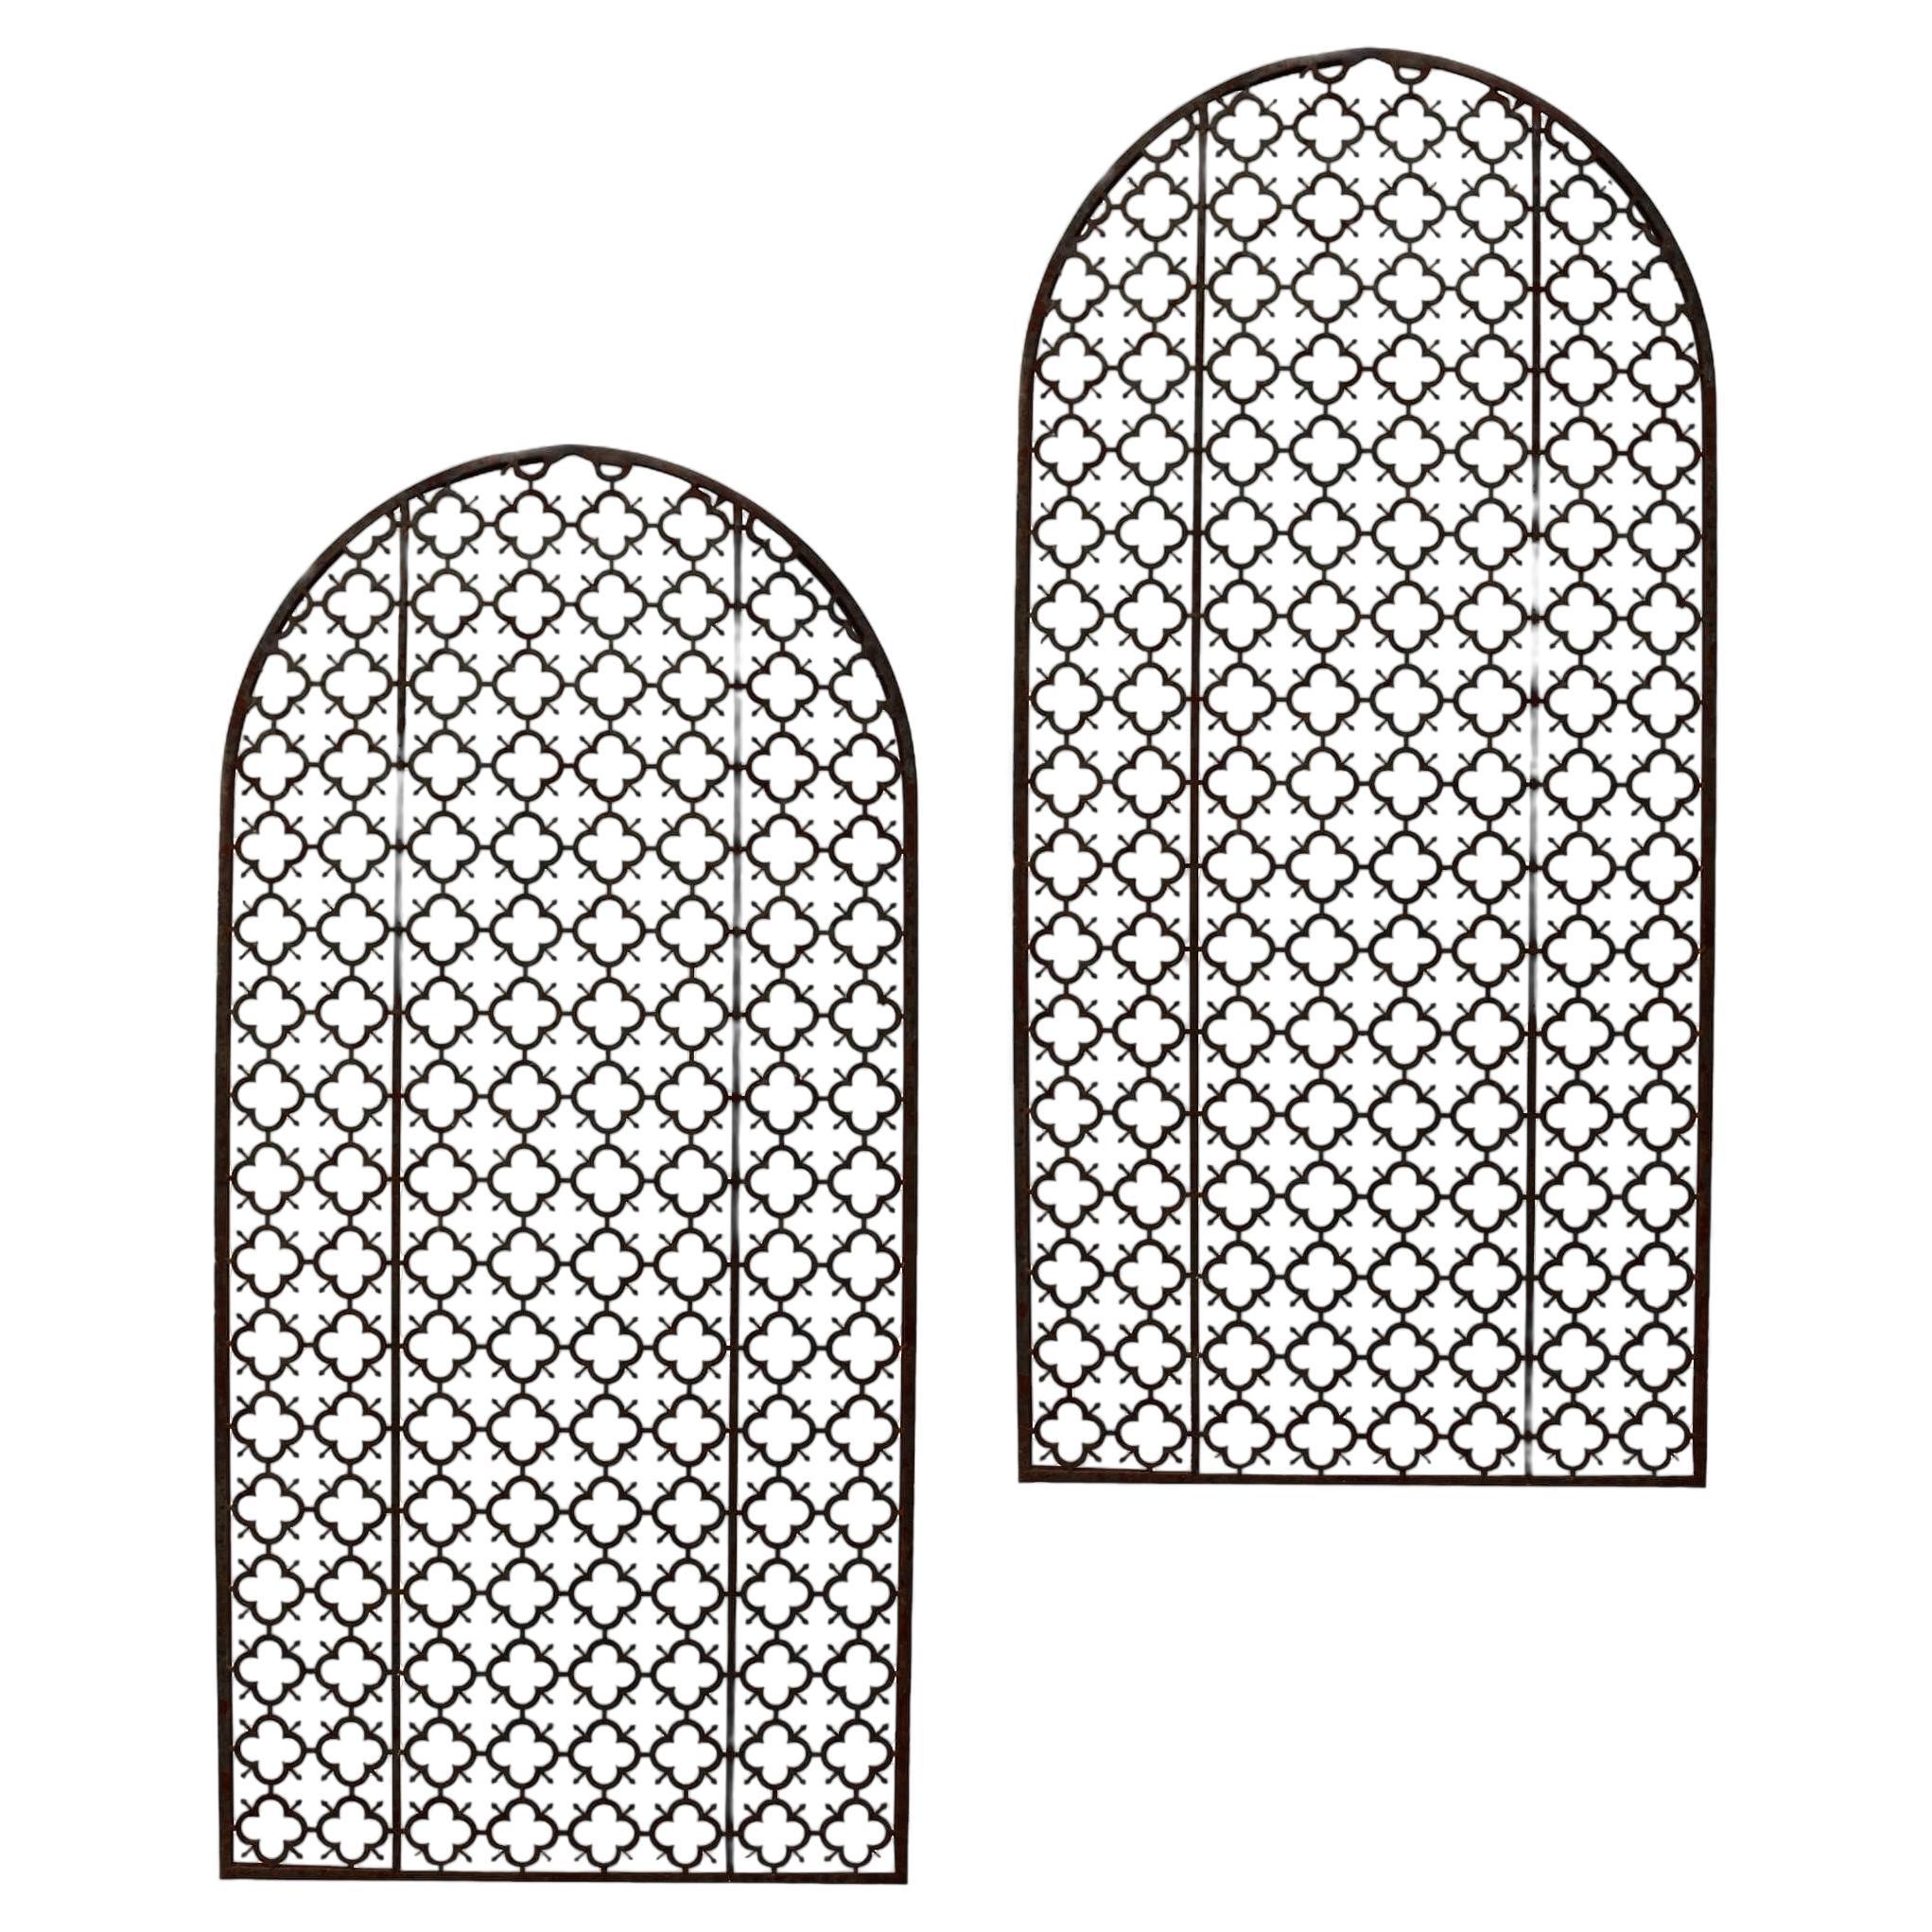 Pair of Large Arched Reclaimed Steel Garden Trellis Panels For Sale